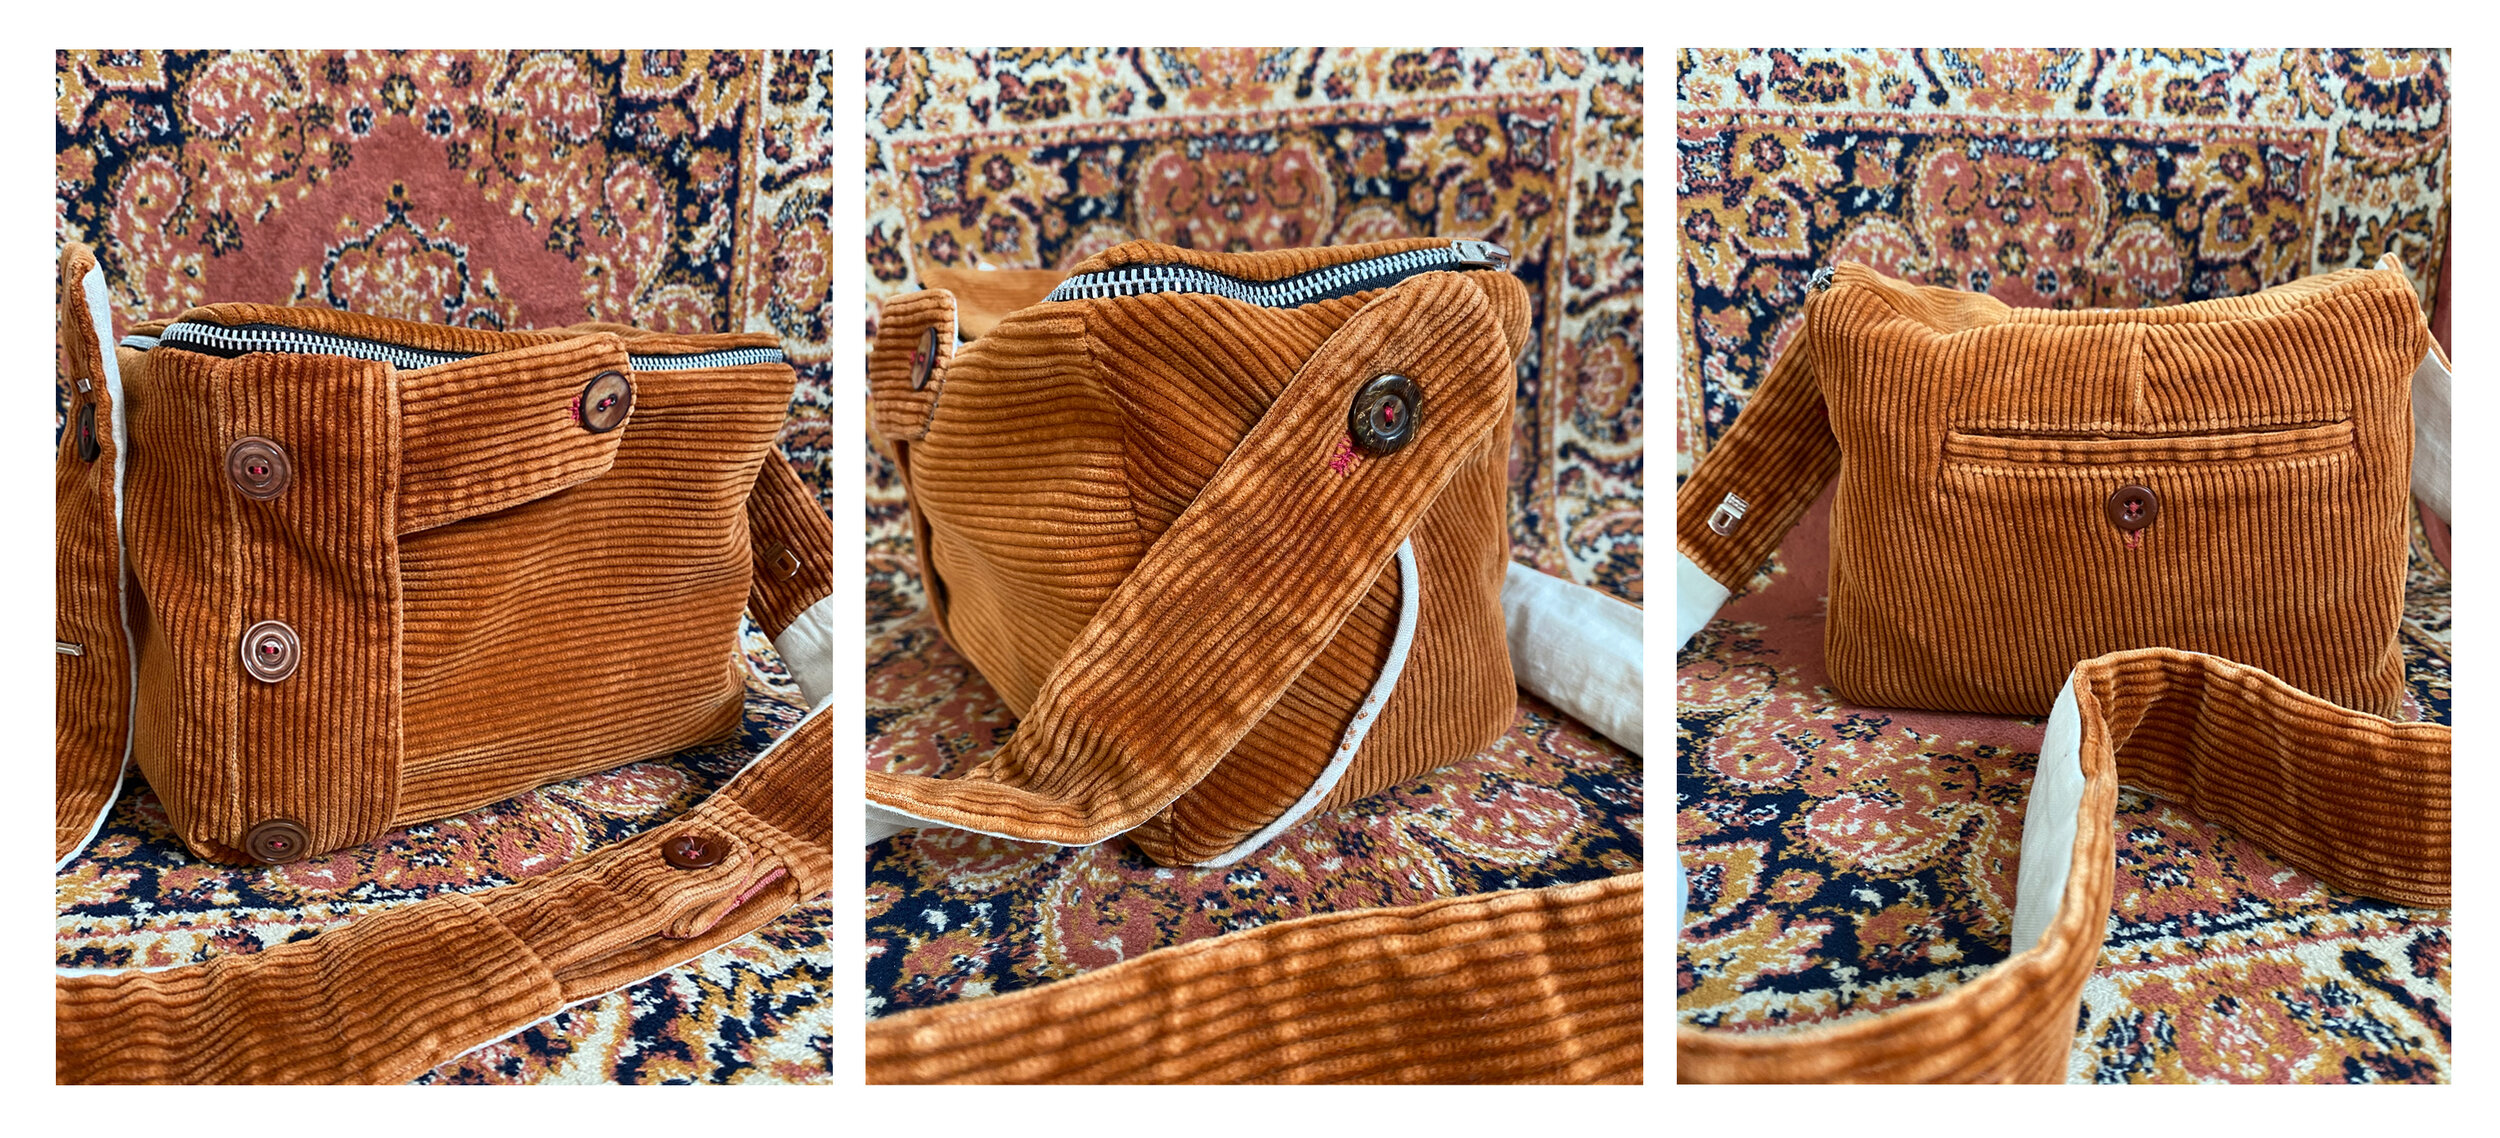  Upcycled camera bag made from cordling trousers 